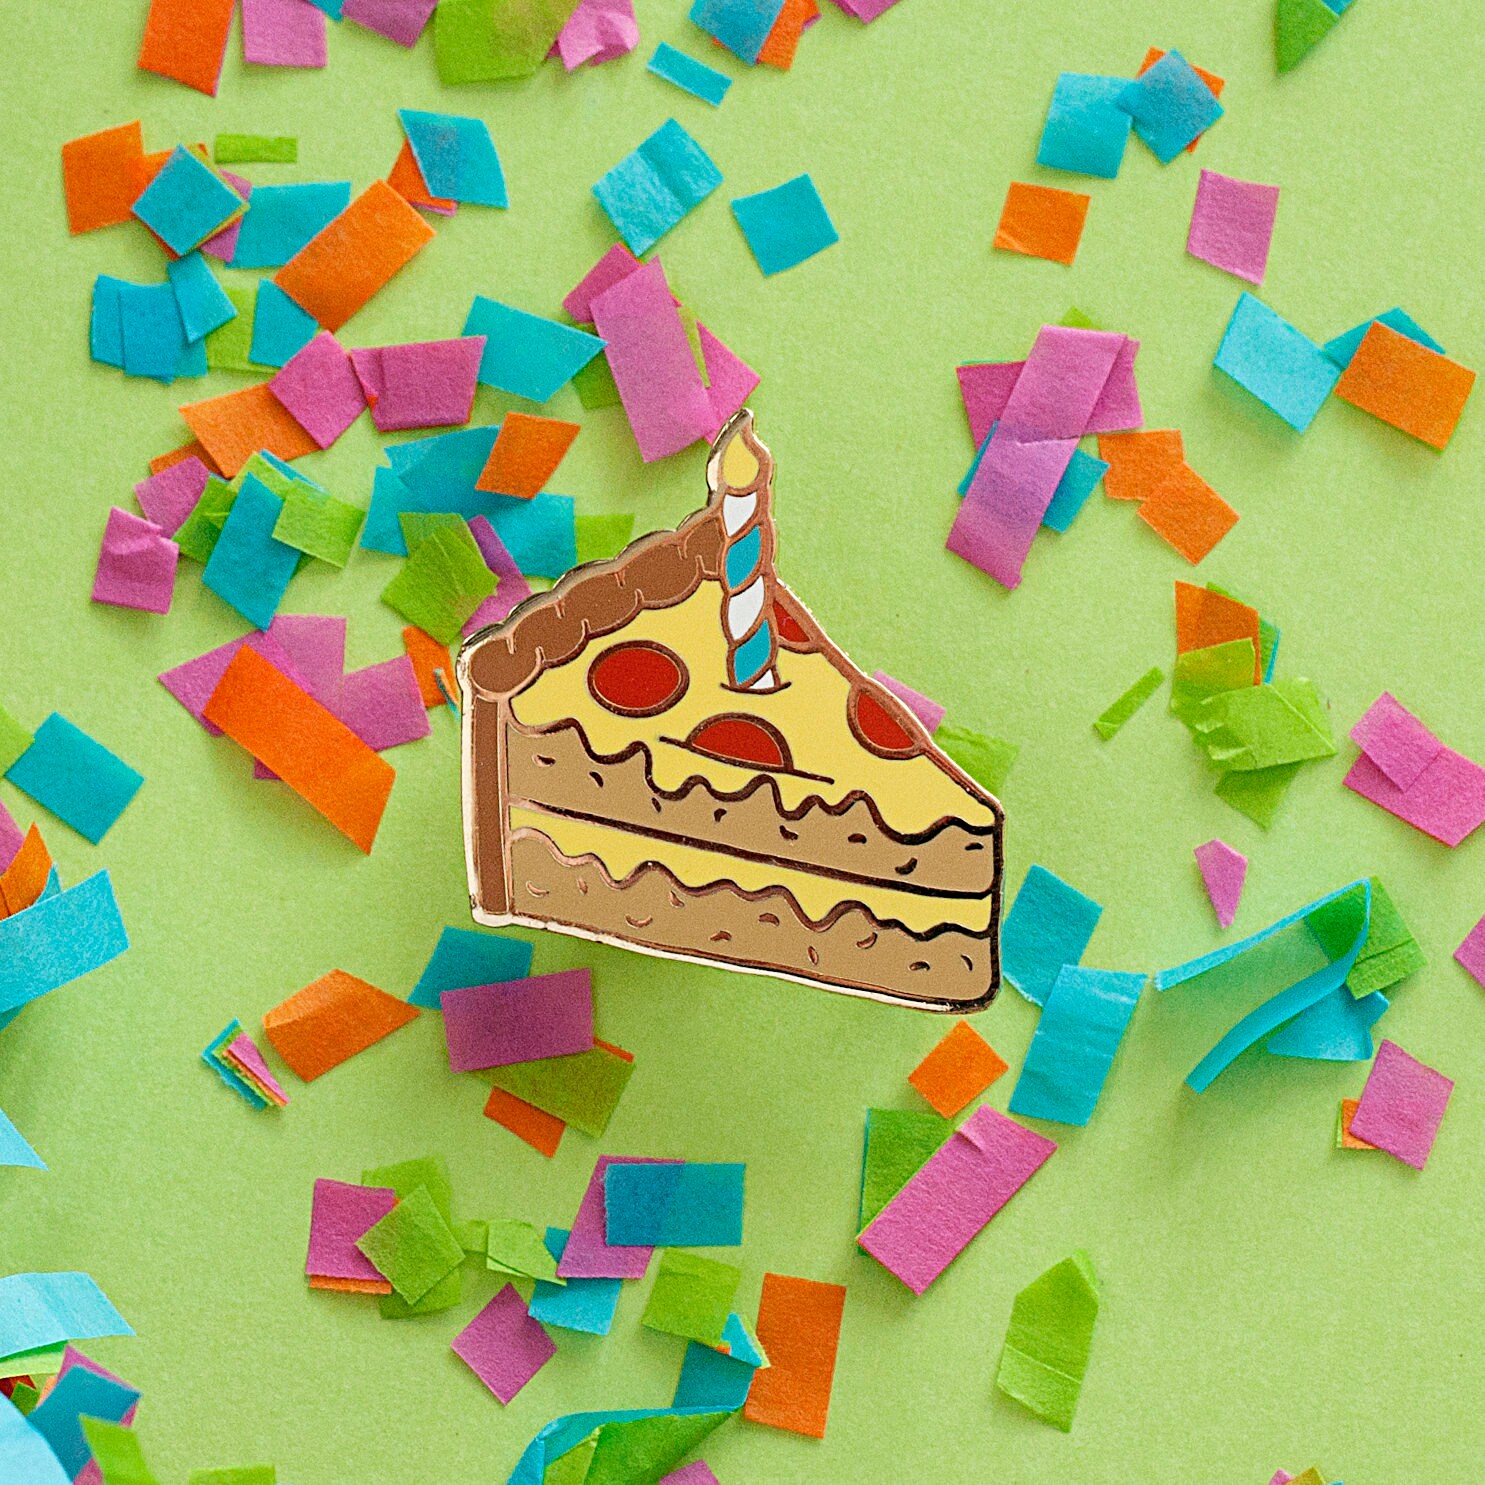 BRIGHT ENAMEL PIN BY LUXCUPS CREATIVE PIZZA CAKE 